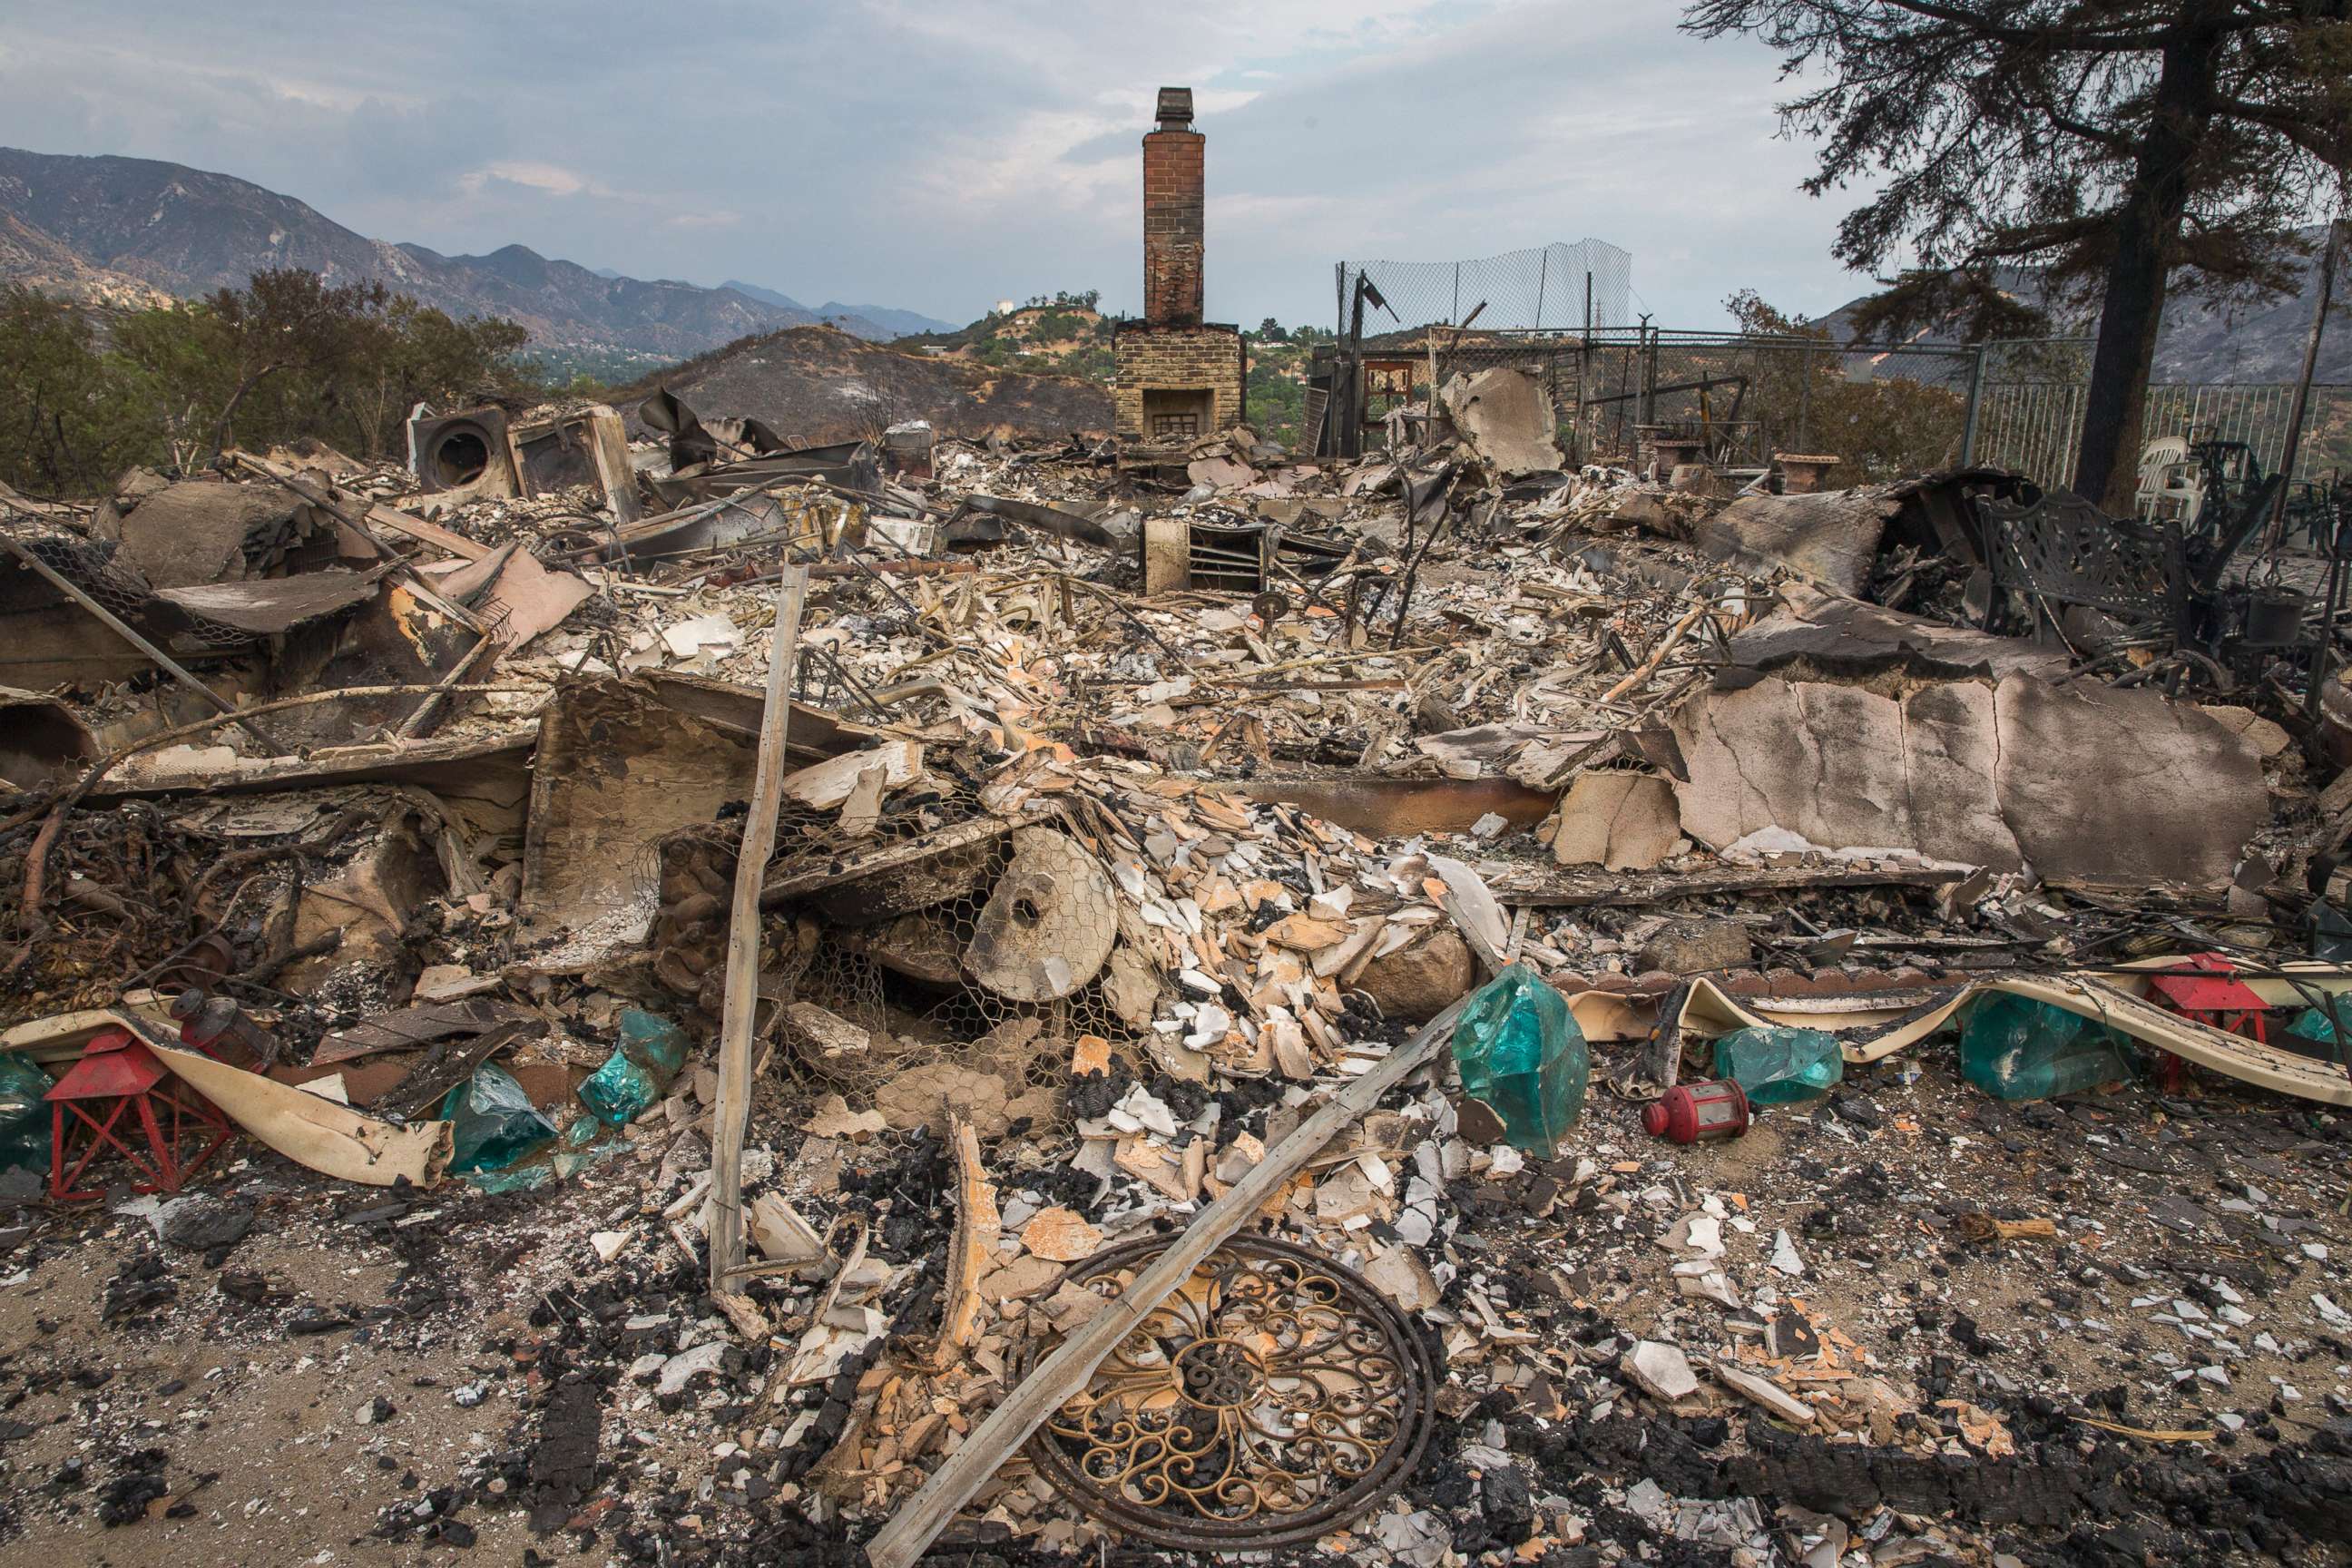 PHOTO: A home and property lie in ruins destroyed in the La Tuna Canyon fire along Crestline Drive in the Verdugo Mountains north of downtown Los Angeles.